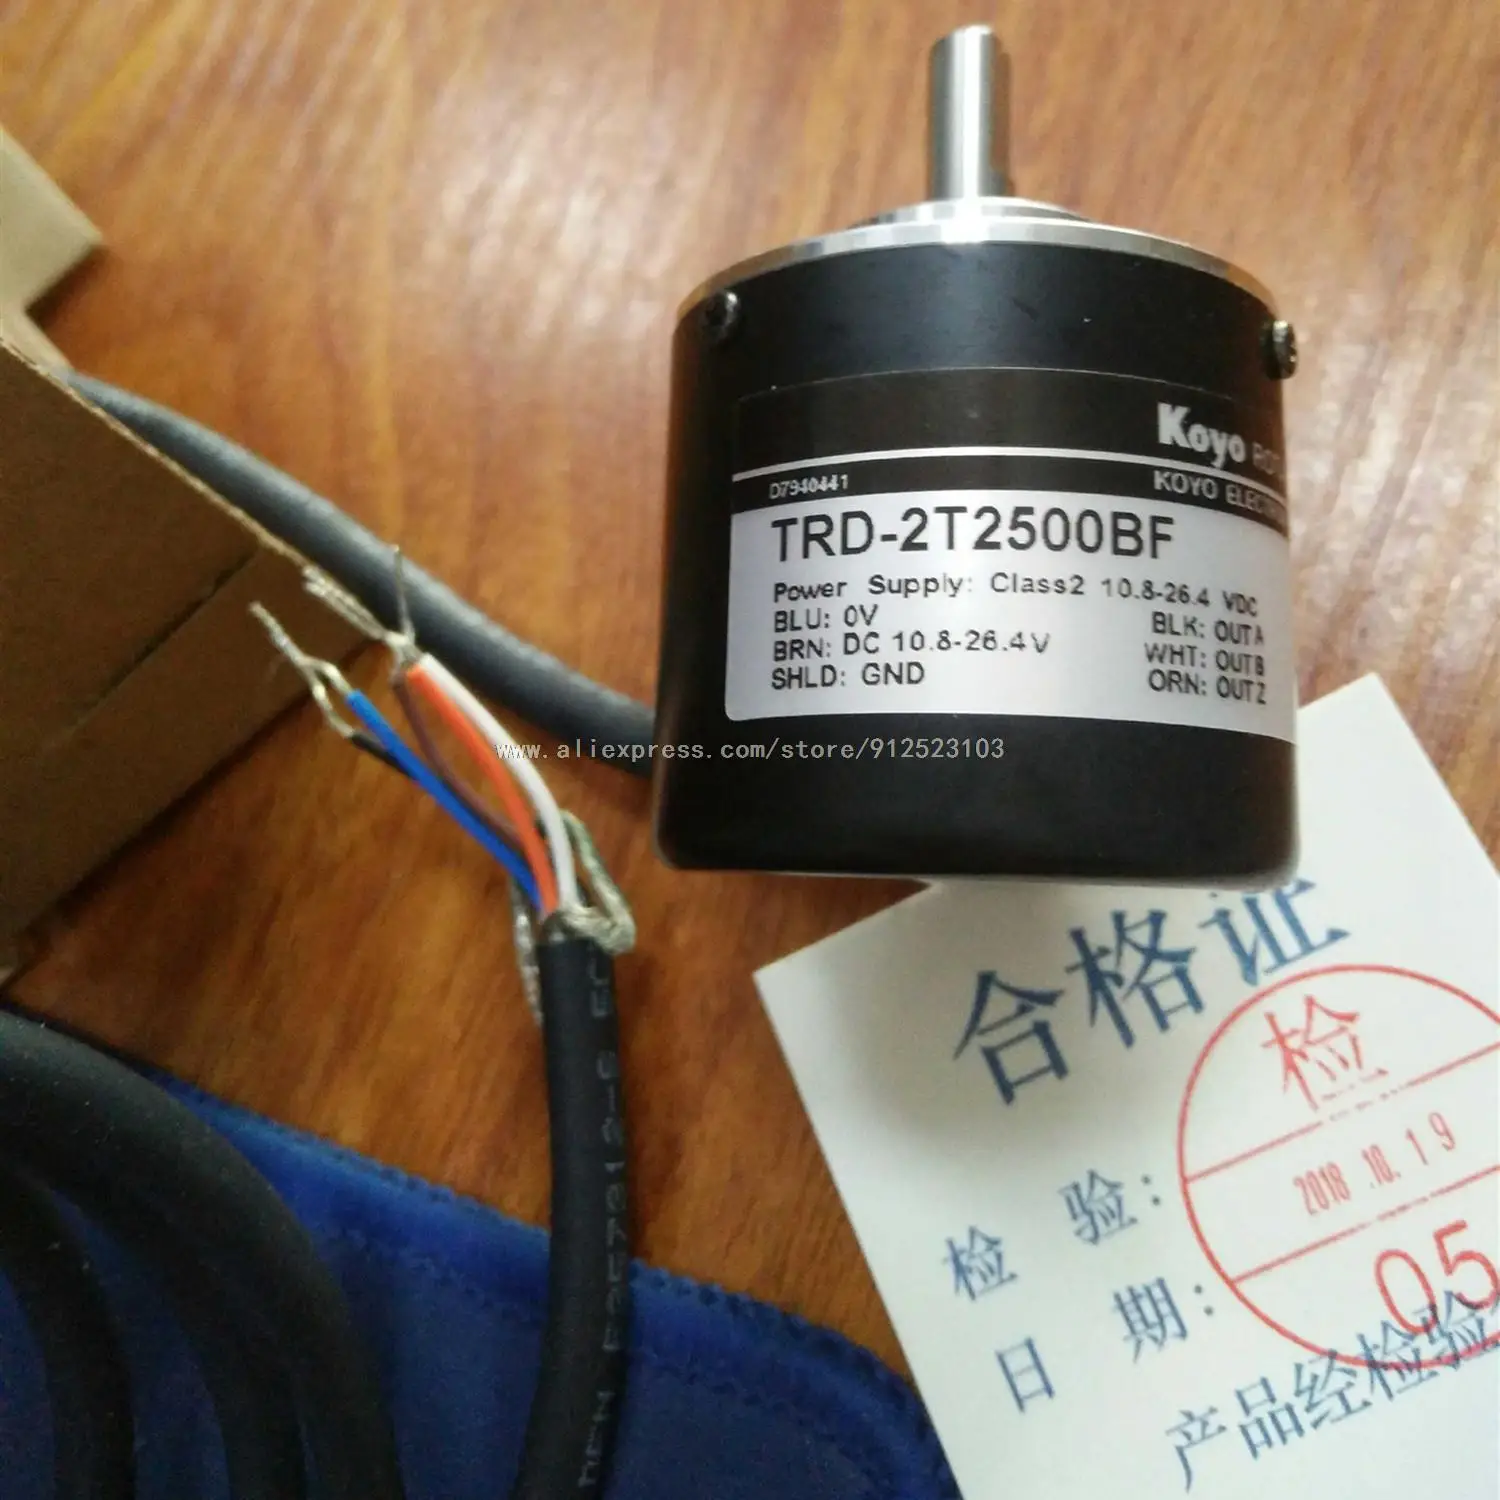 

KOYO new original authentic real axis photoelectric incremental rotary encoder TRD-2T2500BF DC10.8-26.4V